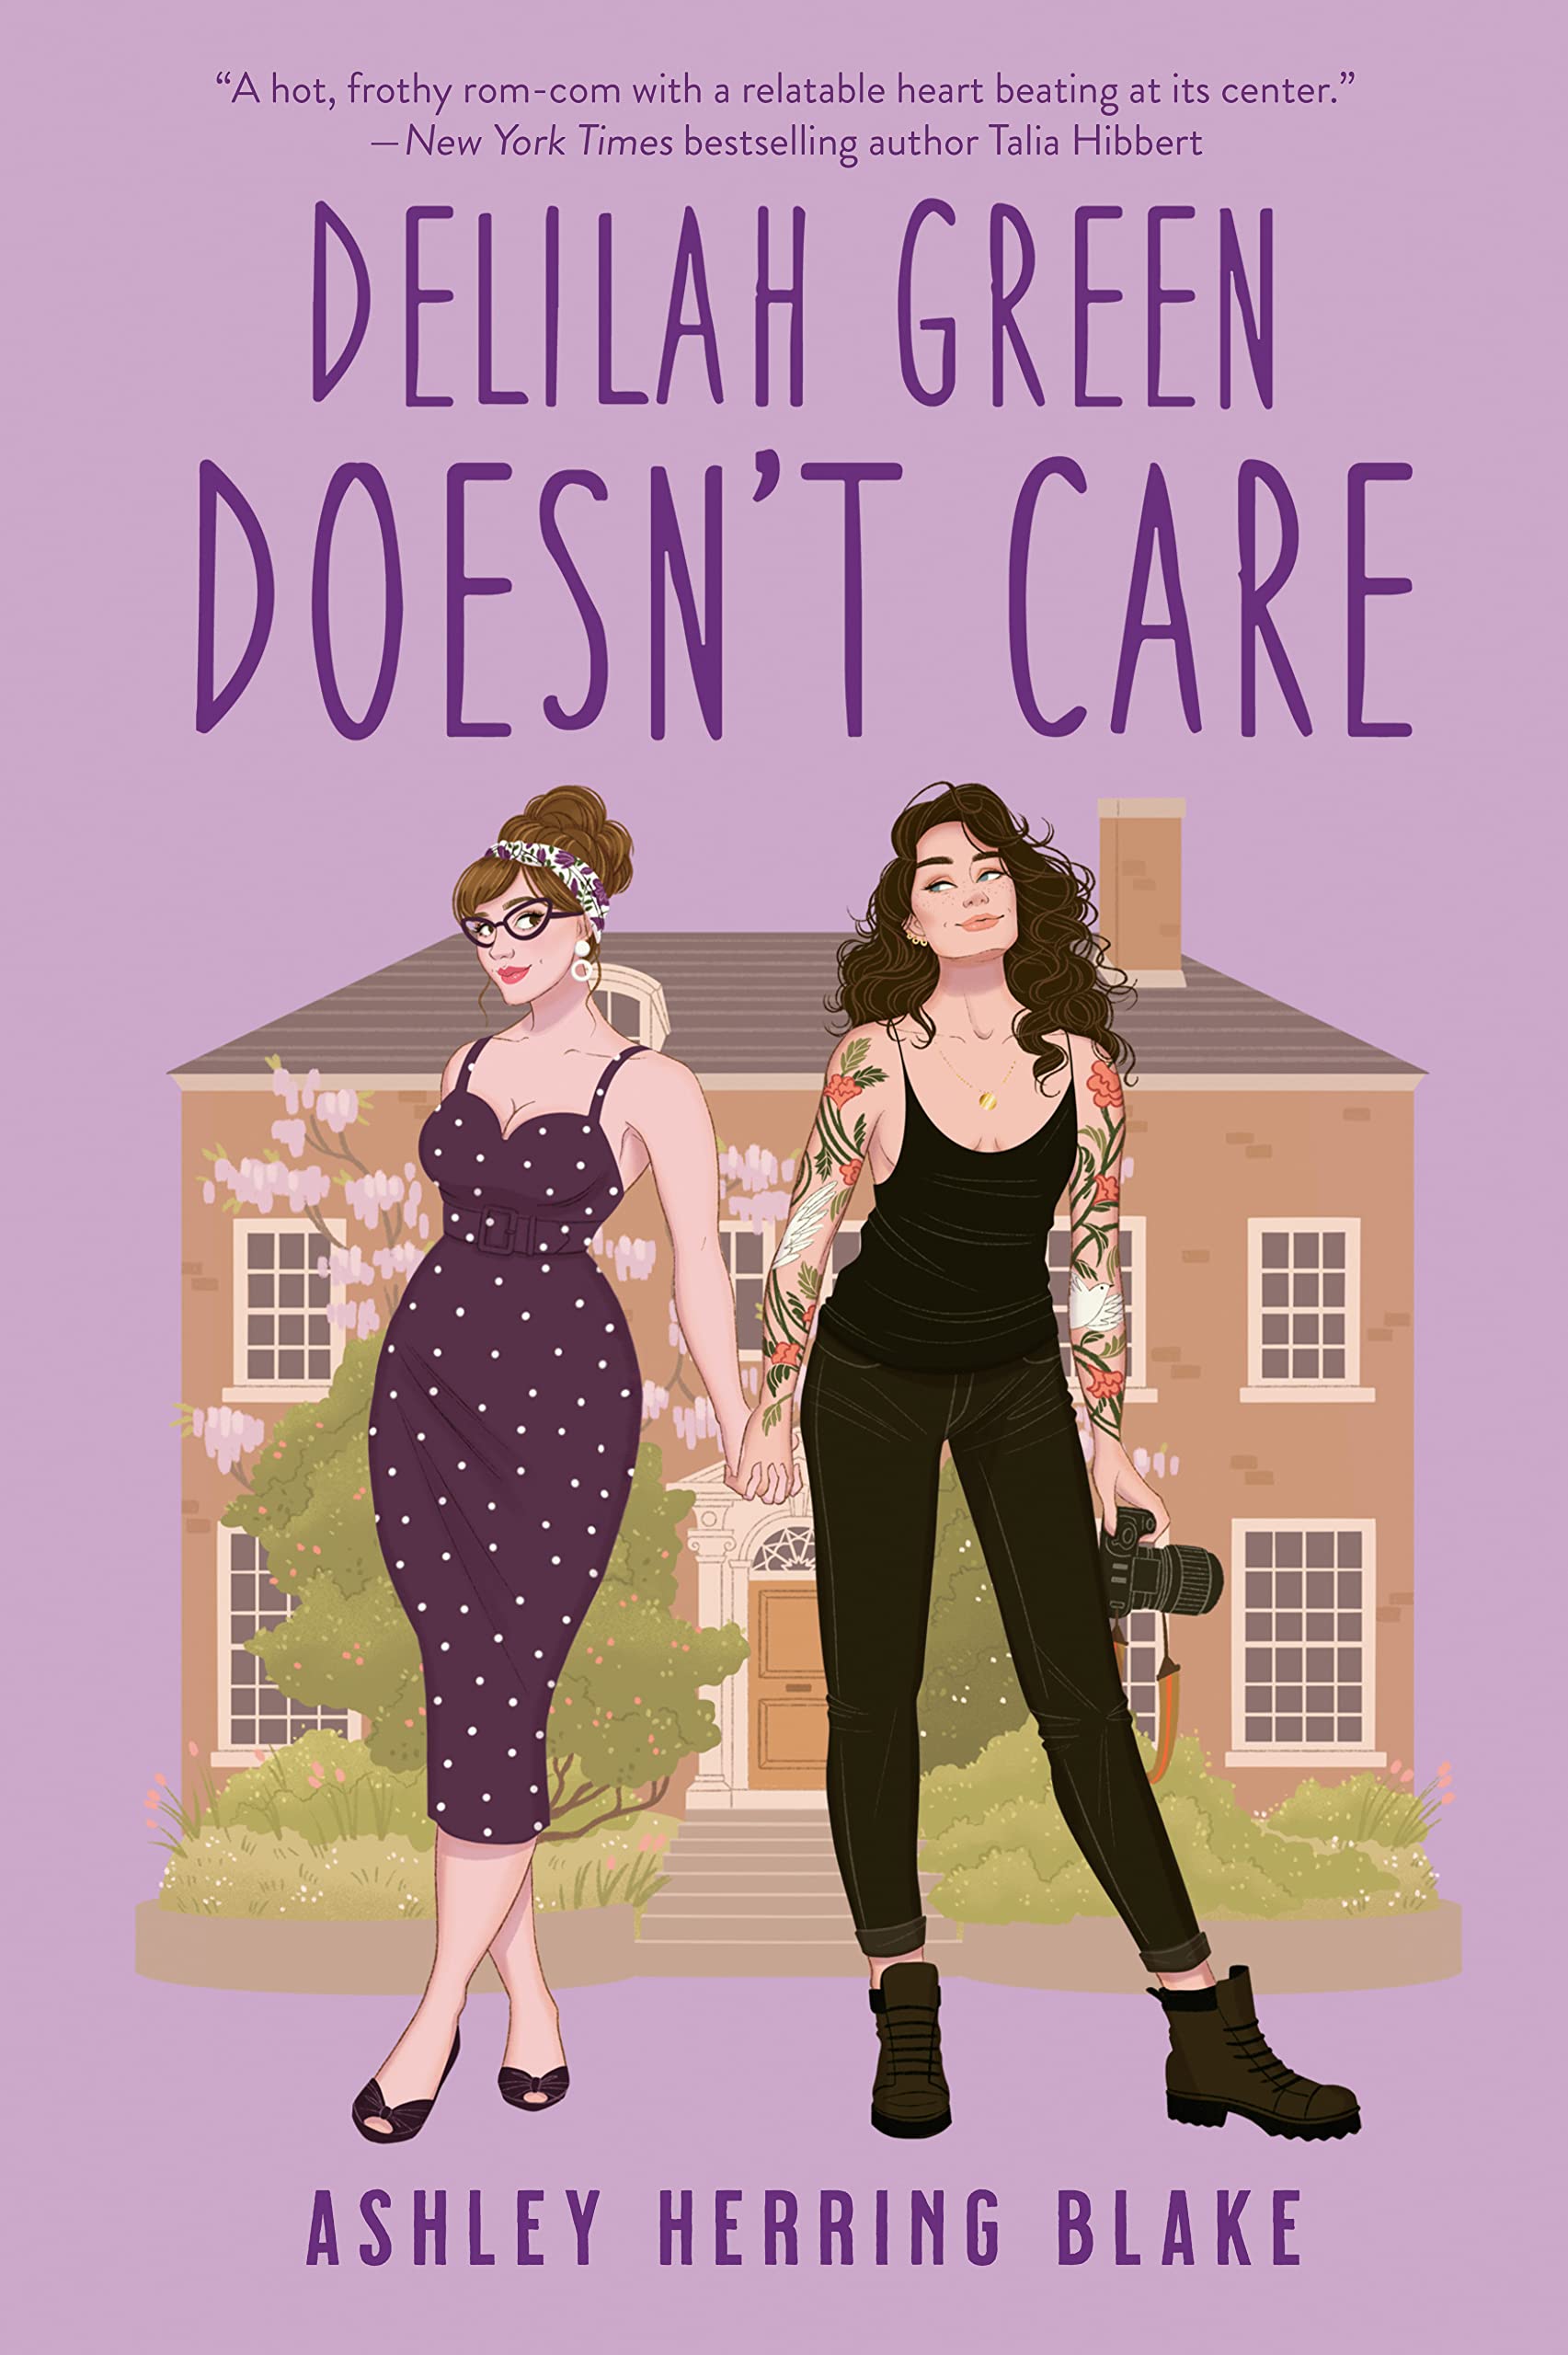 The book cover for Delilah Green Doesn't Care by Ashley Herring Blake